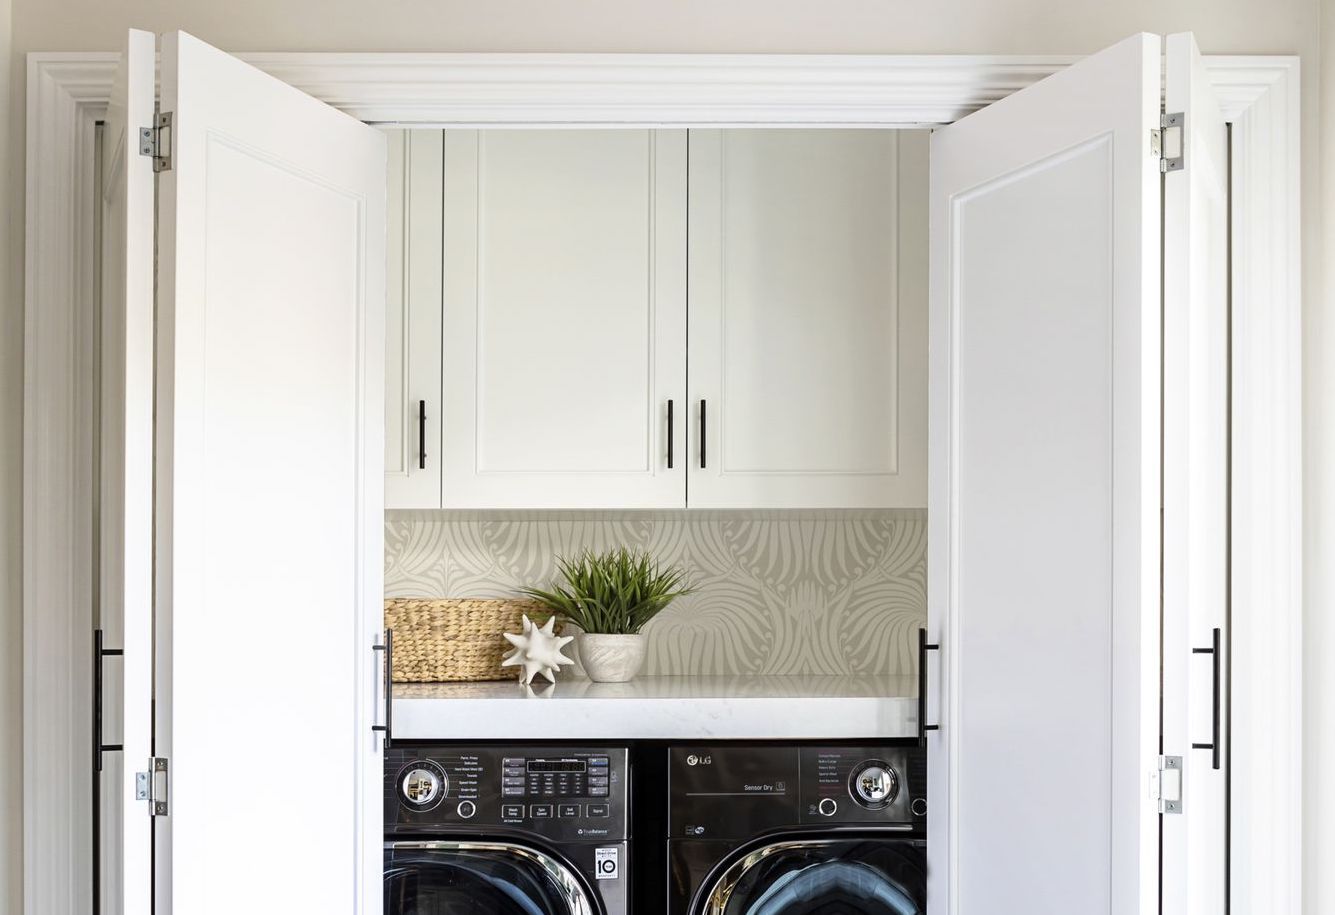 Laundry room ideas – 23 luxurious looks for your laundry room